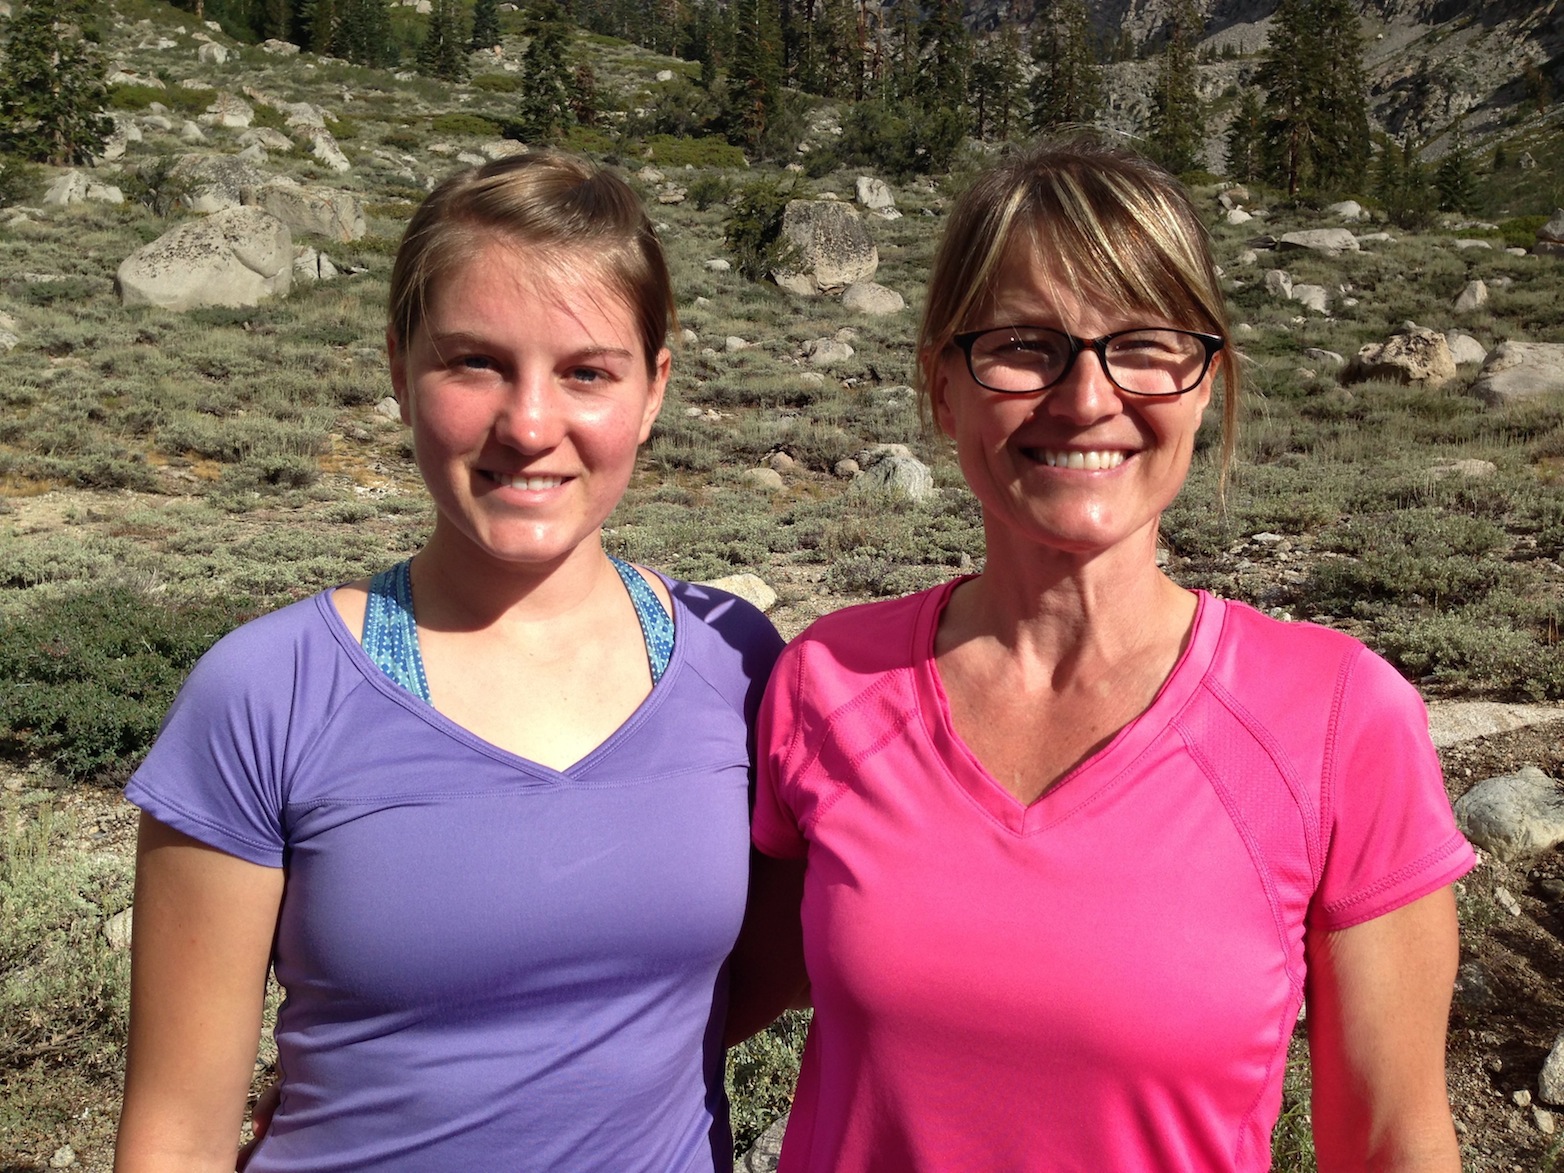 JMT hikers Beth and Debbie (mother and daughter) are ready to tackle Kearsarge Pass